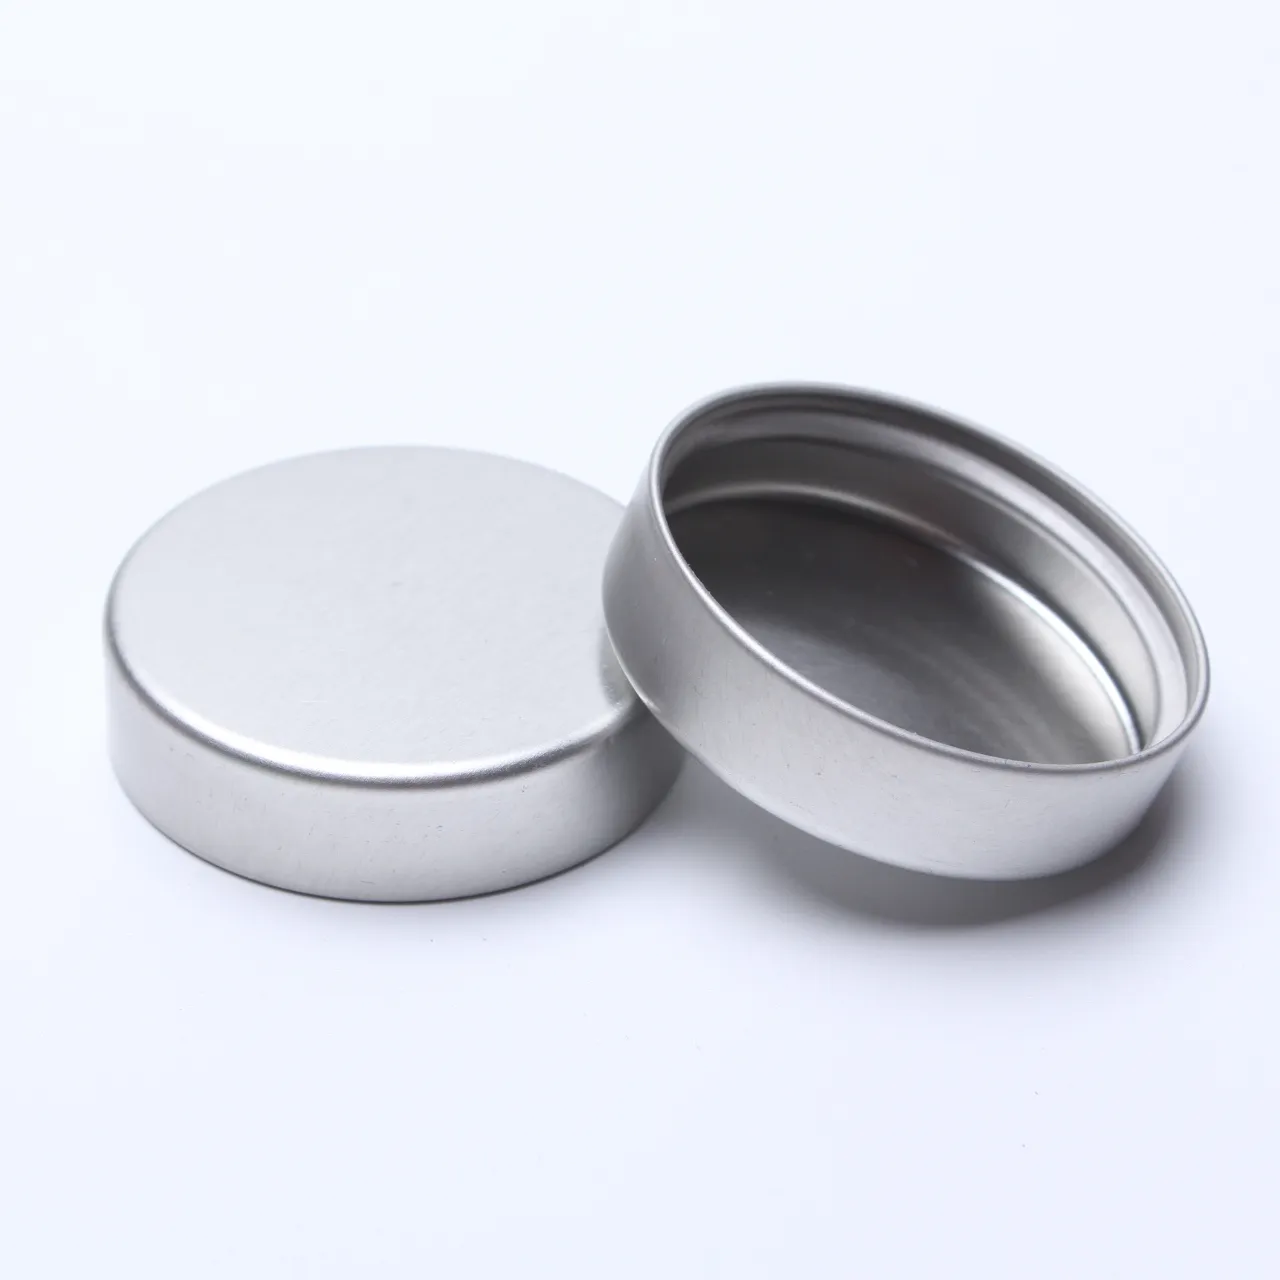 Hotsale 38/400 45/400 53/400 58/400 70/400 89/400 Unishell Lids With Induction Seals